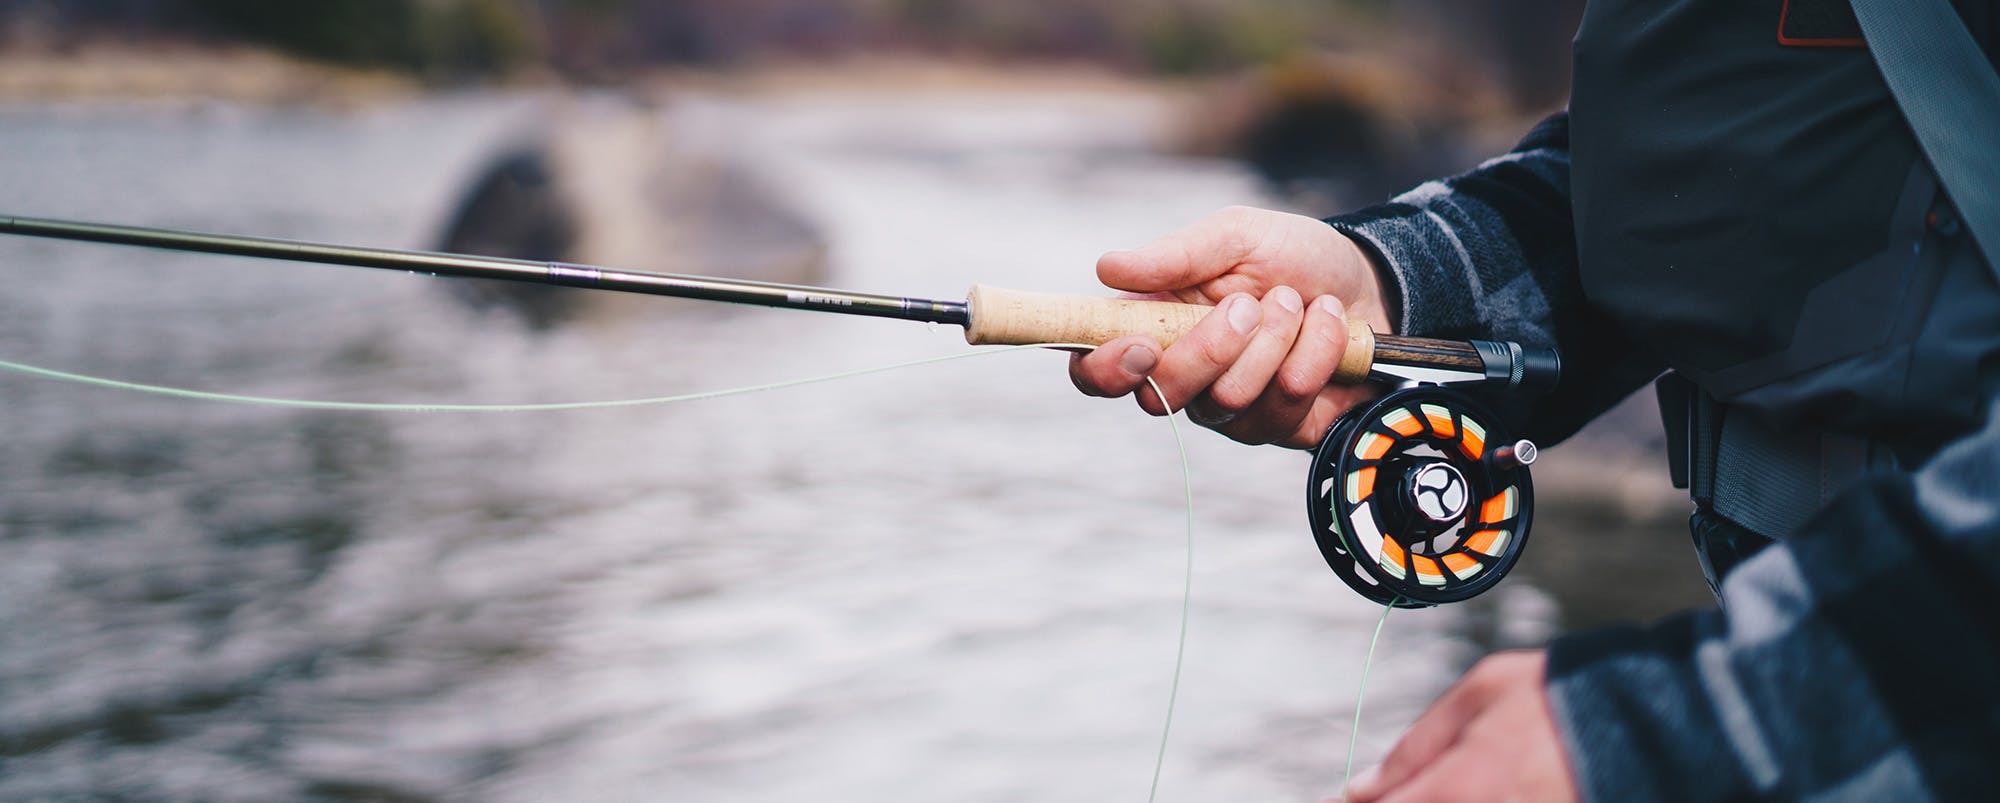 Orvis Encounter Fly Fishing Combo Review – Budget Friendly